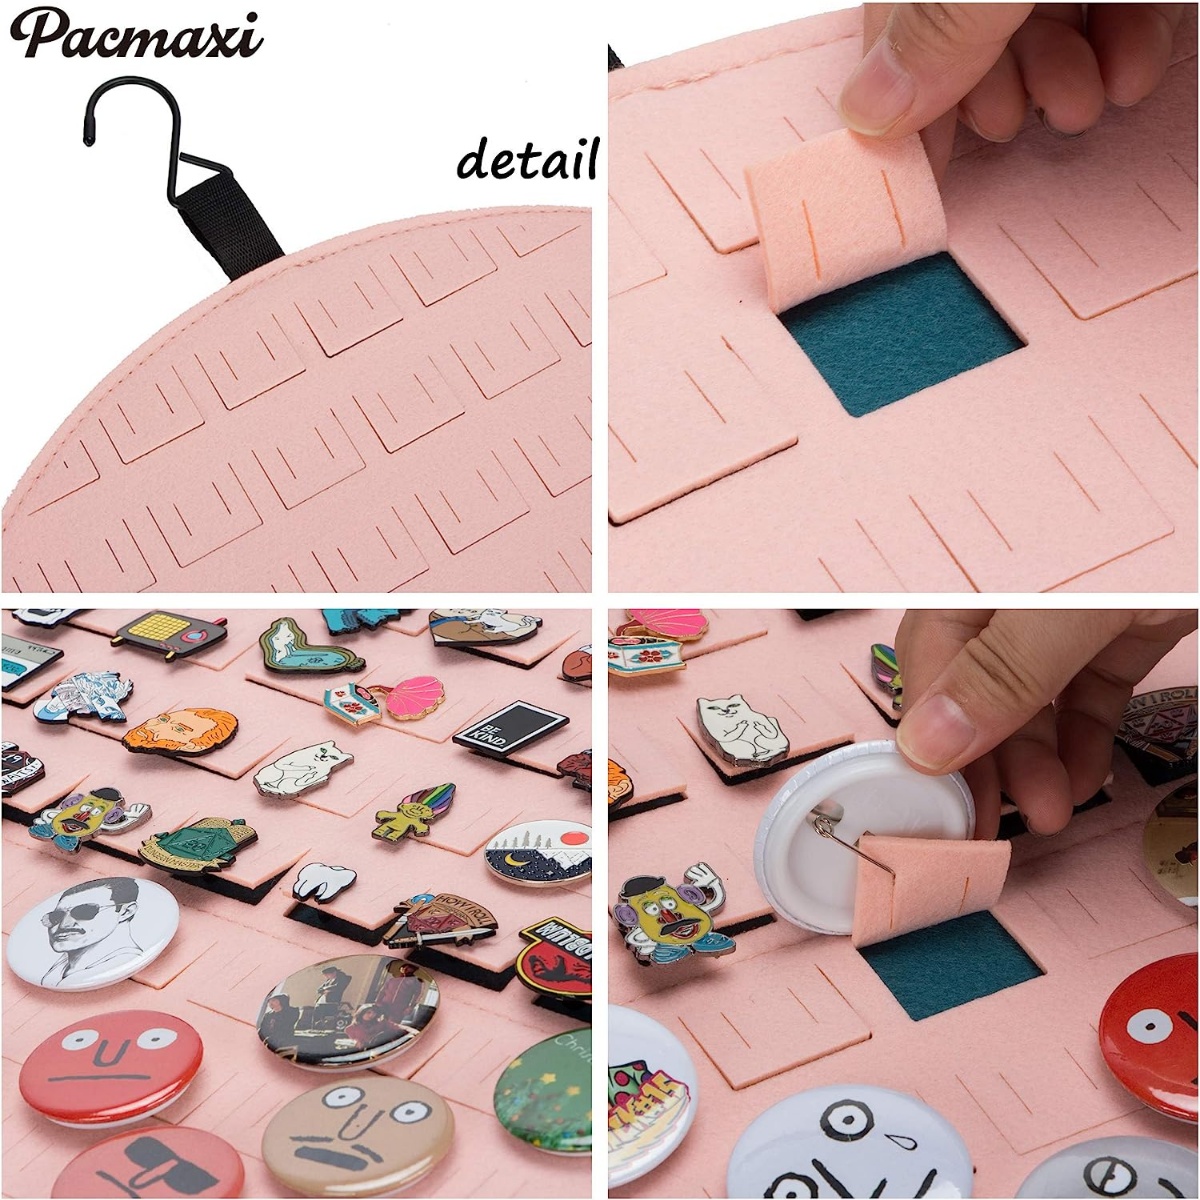 Mi Ya Mi Lai Wall Hanging Brooch Pin Organizer,Pin Collection Display  Case,pin Board for Enamel pins,Holds Up to 76 Pins.(Not Include Any  Accessories)